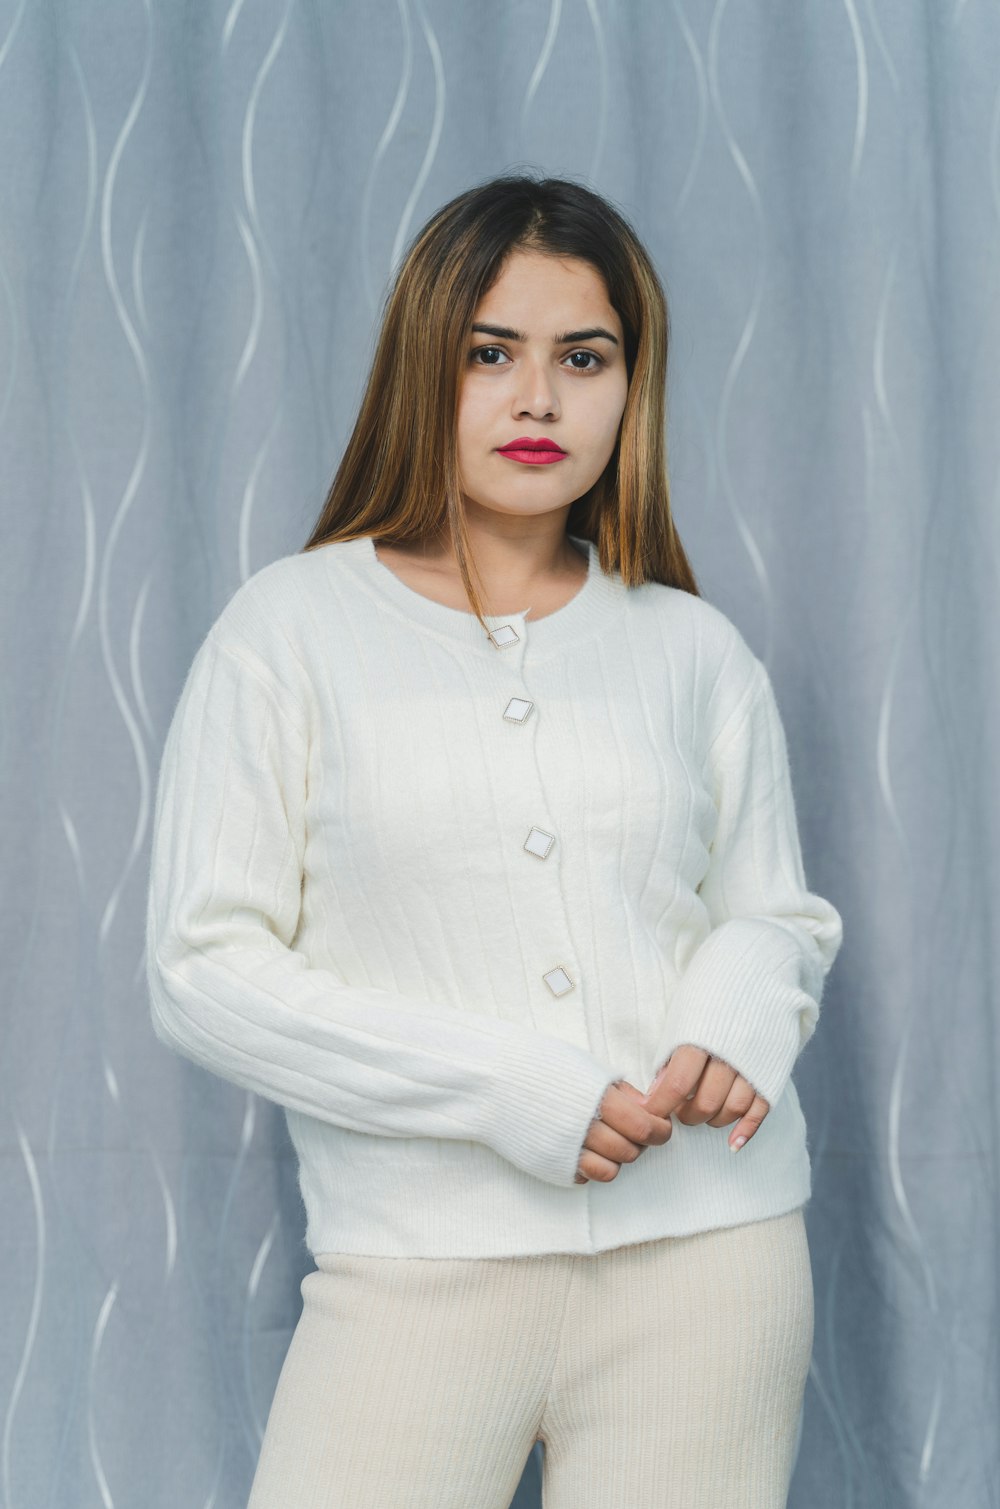 a woman wearing a white sweater and pants